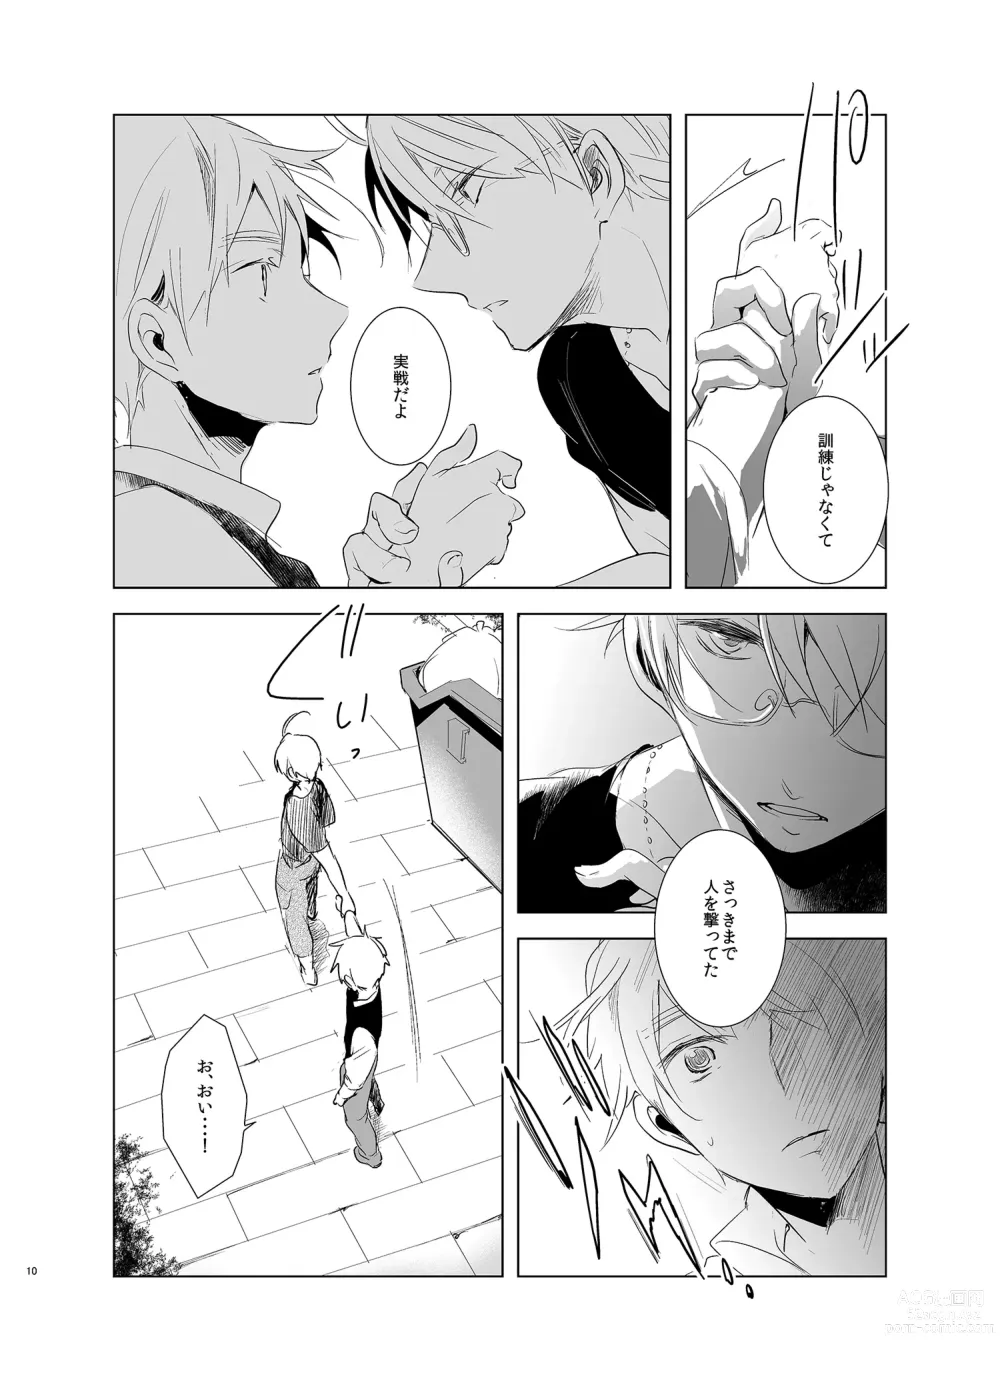 Page 9 of doujinshi Faint Promise